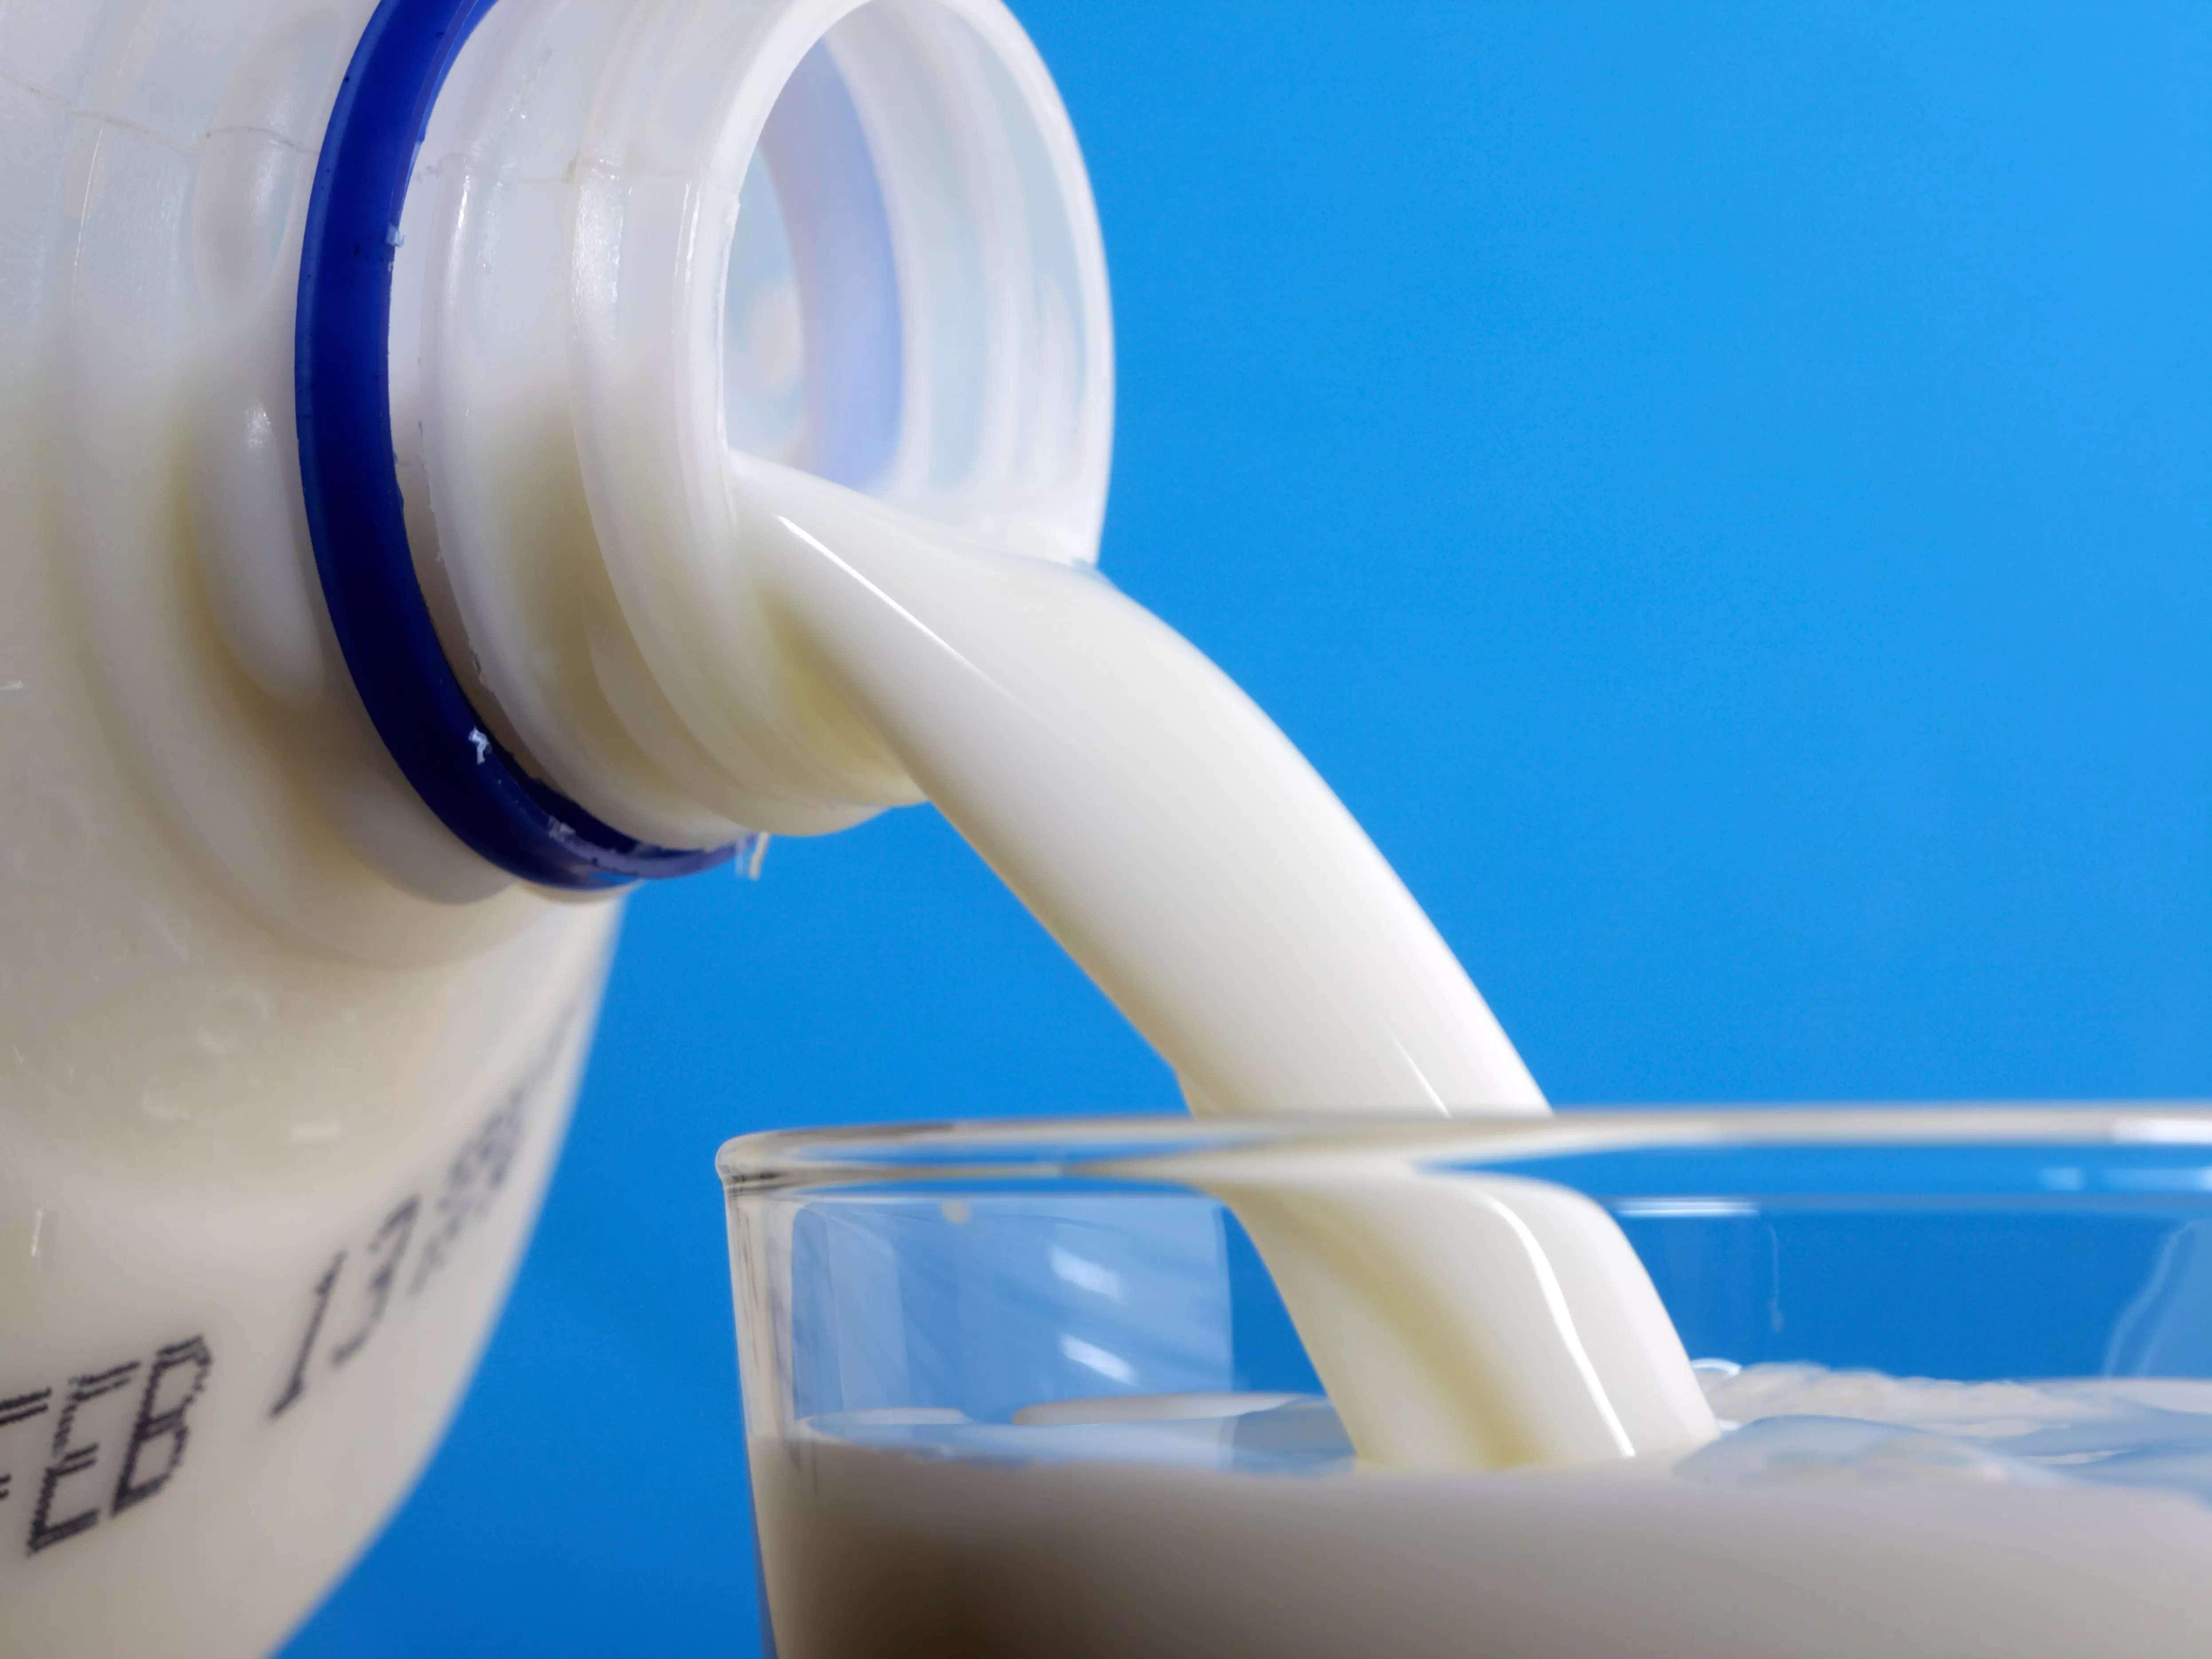 New research says cow's milk is better for you than oat milk or other plant-based vegan alternatives - Business Insider India